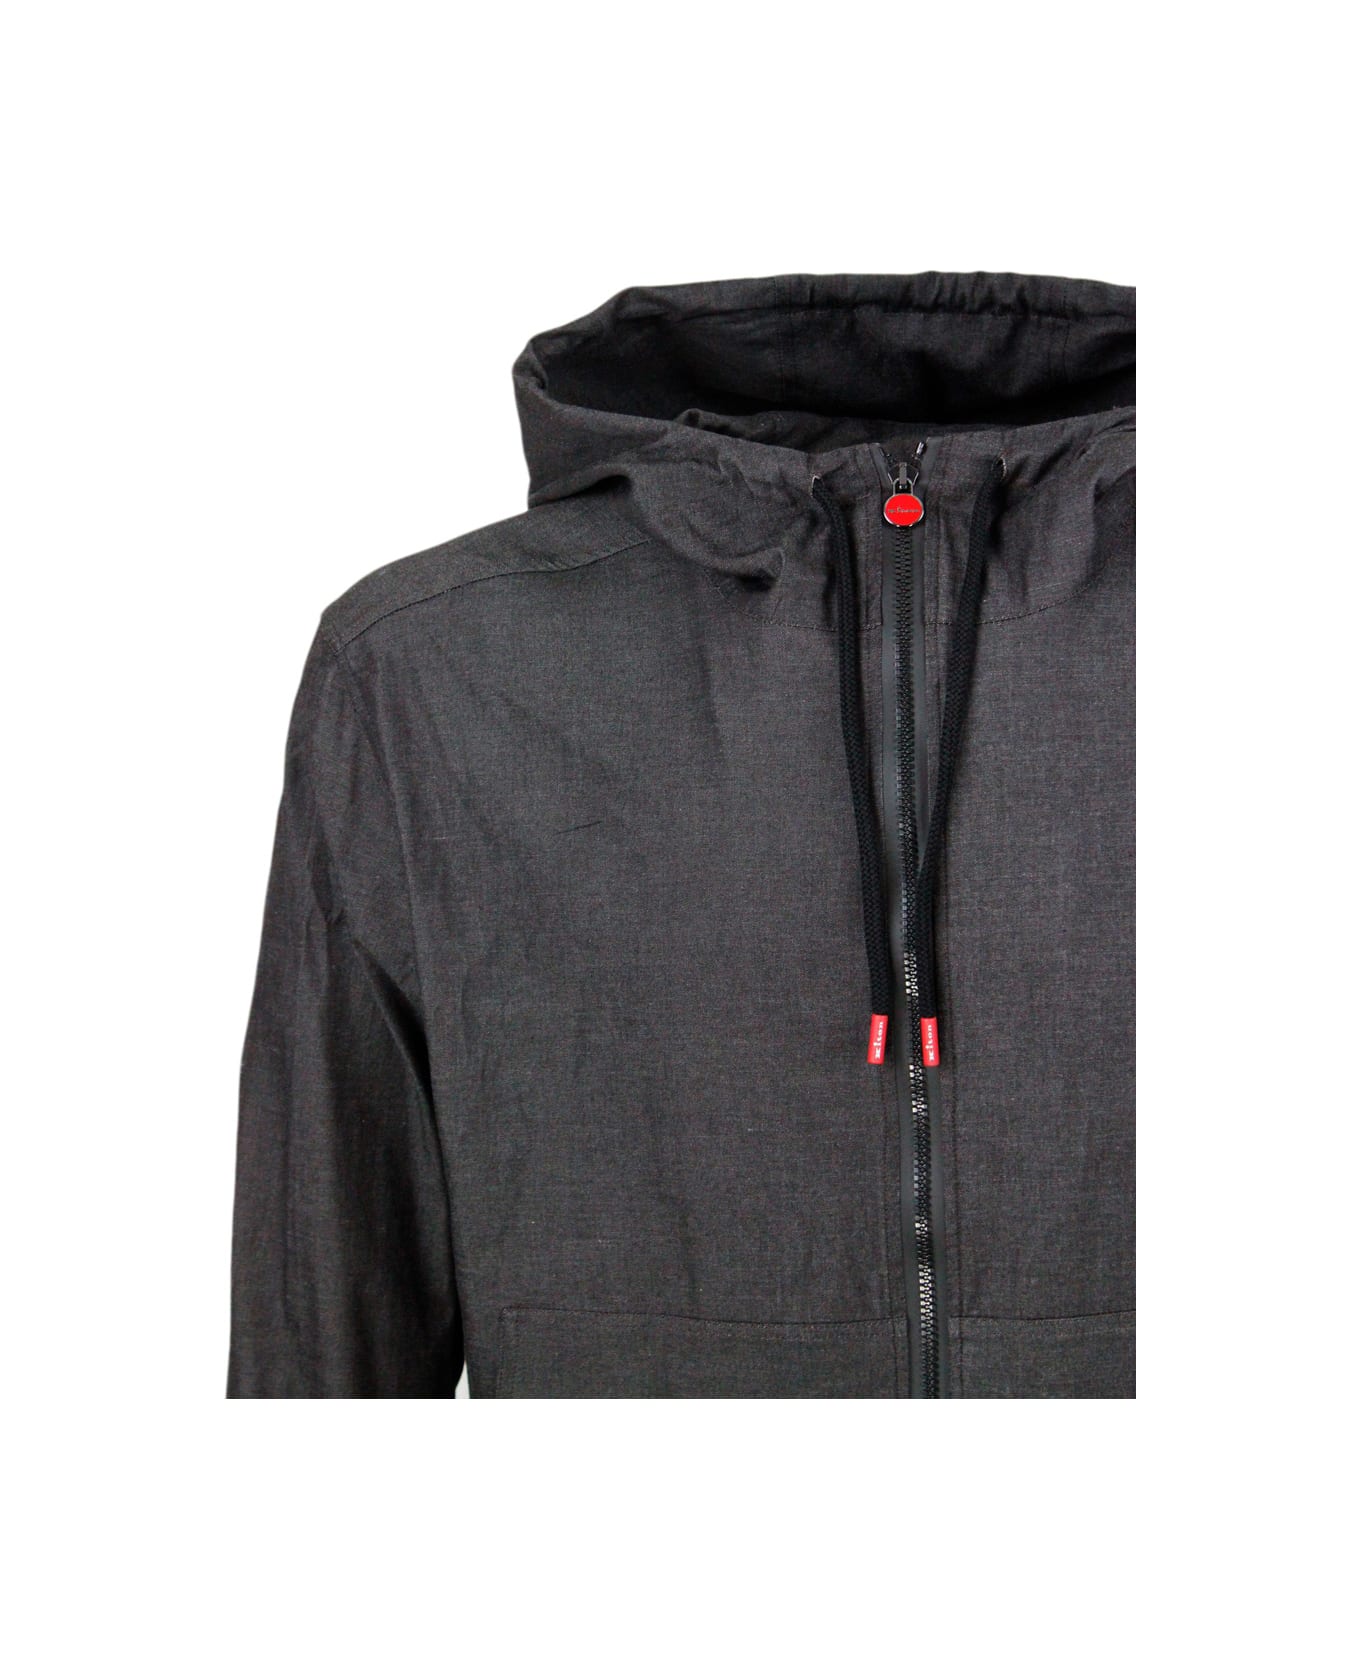 Kiton Super Light Sweatshirt Jacket With Hood In Very Soft Denim-effect Cotton Fabric With Zip Closure With Logo On The Zip Puller - Black denim